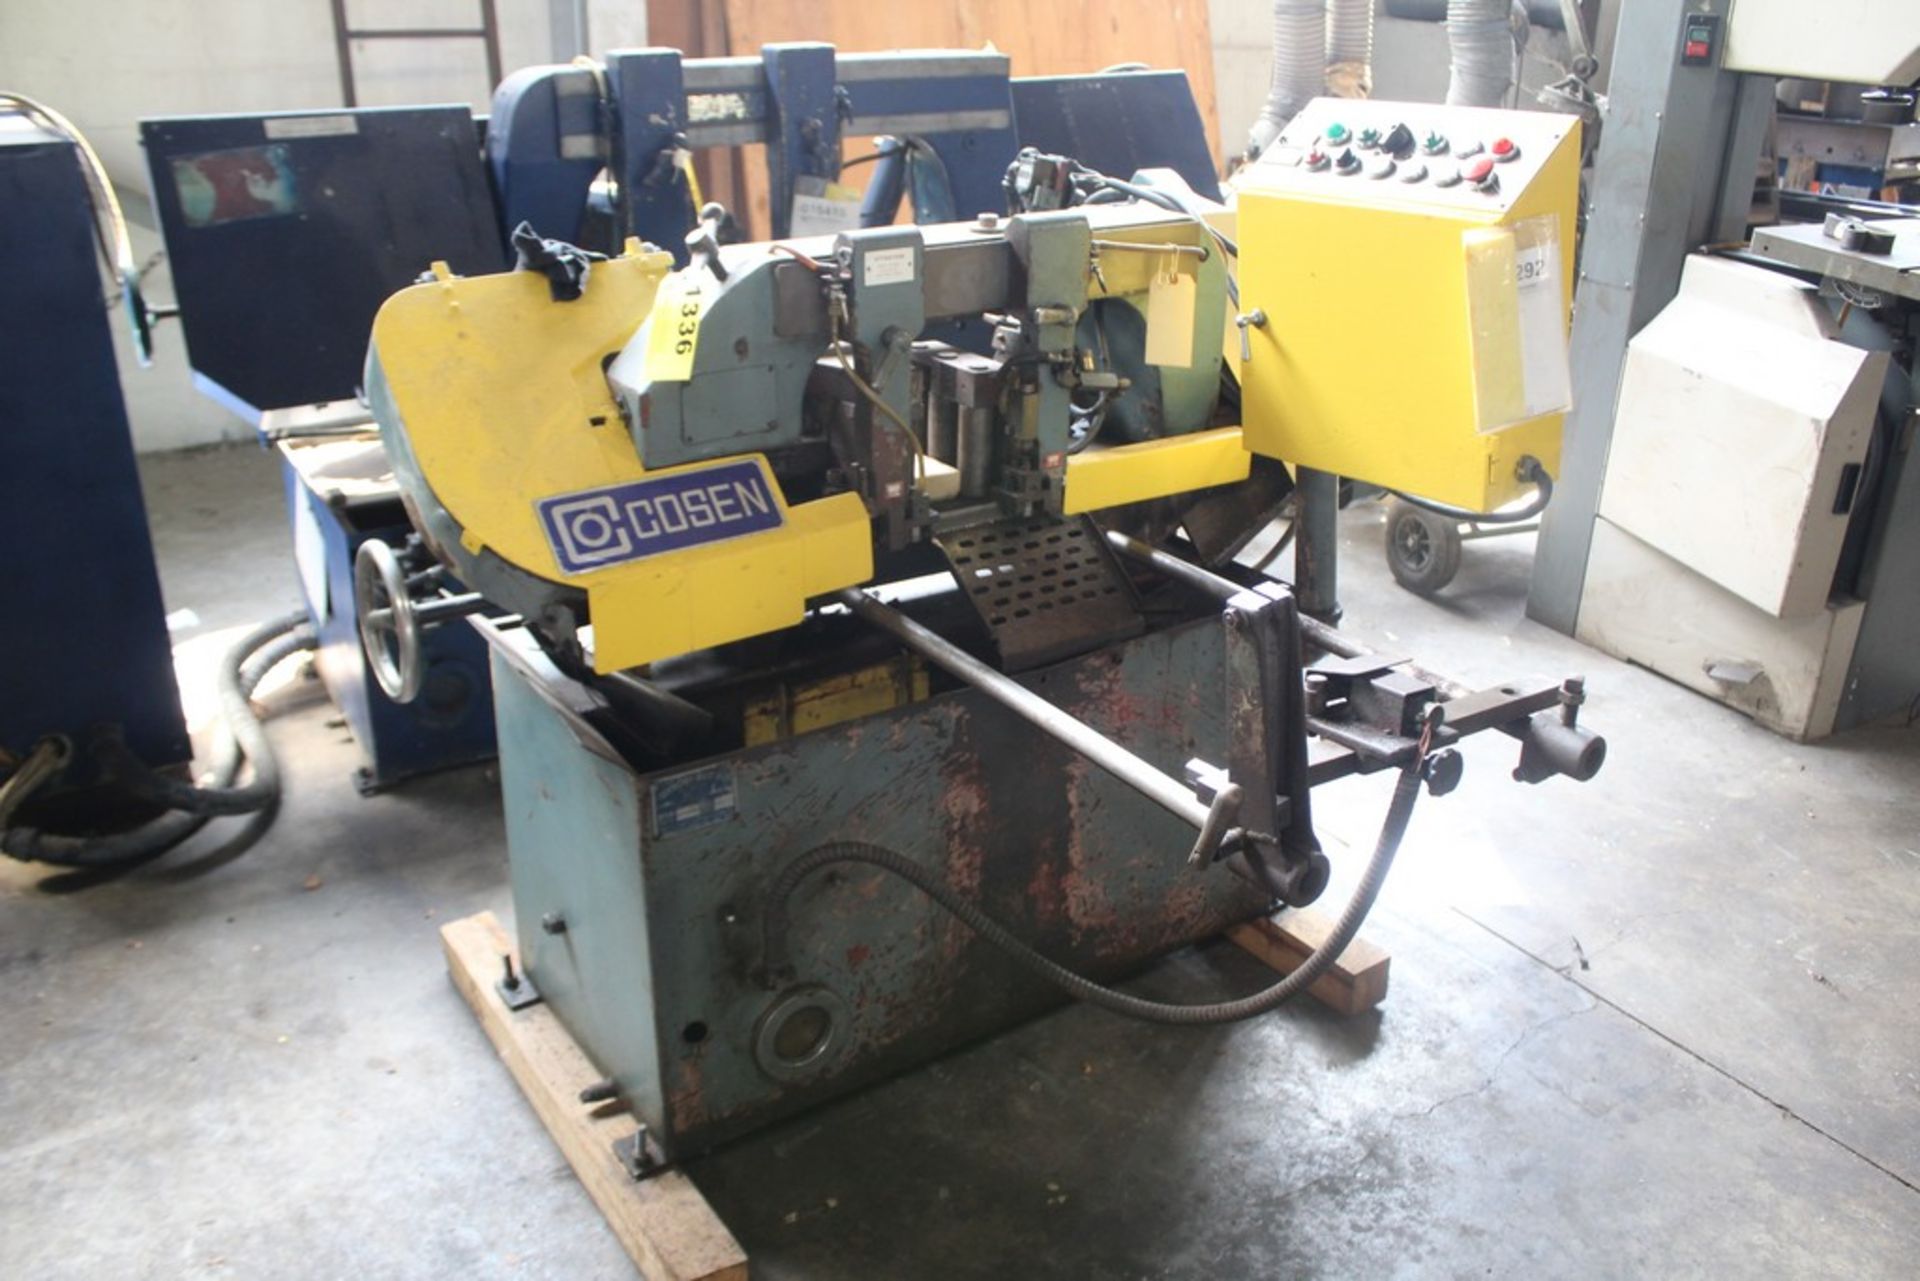 10" X 10" COSEN AUTOMATIC HORIZONTAL BAND SAW, S/N C190821 (1981) MODEL AH250, EQUIPPED WITH VISE,